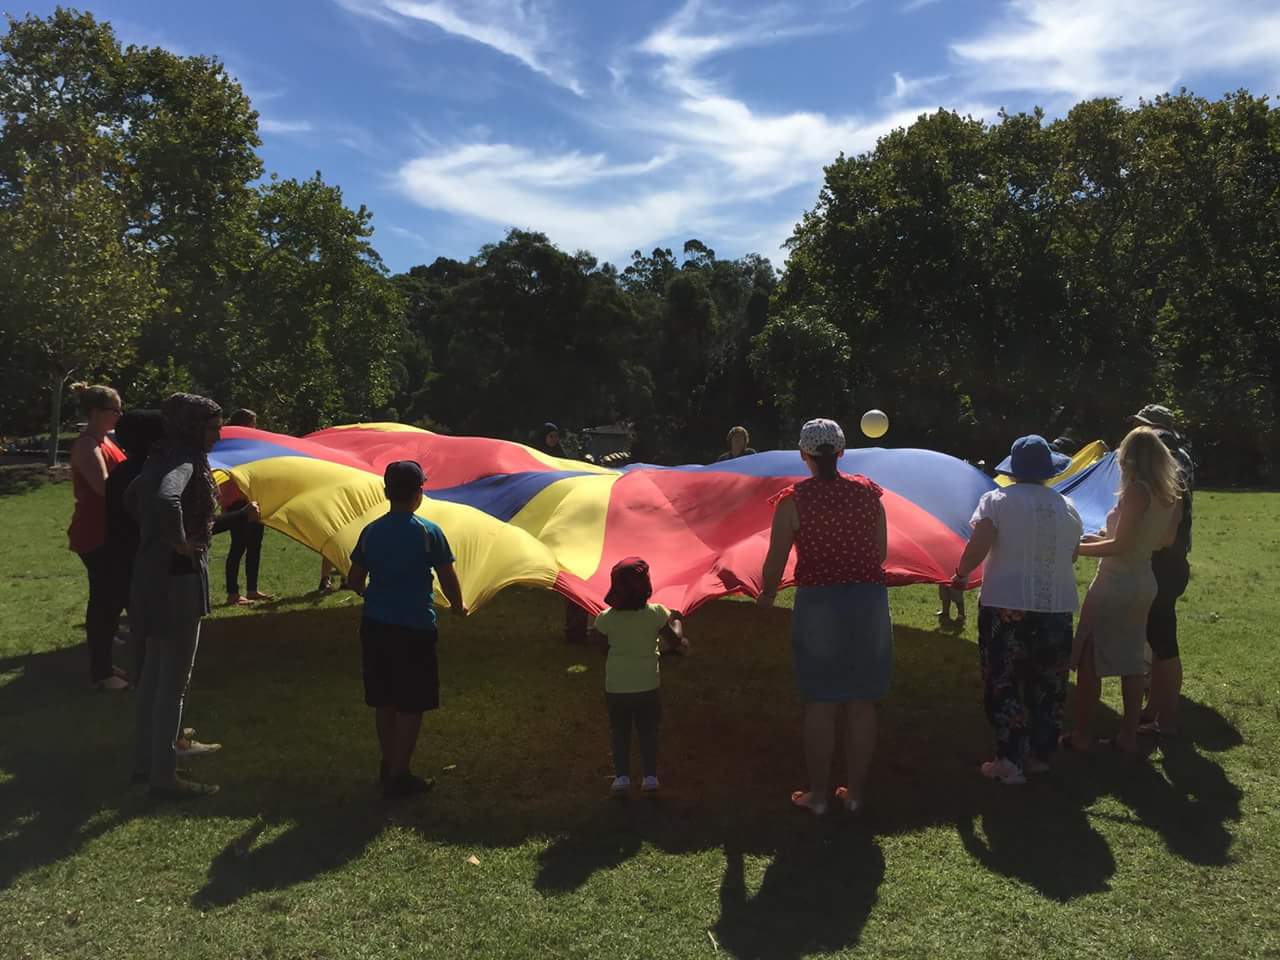 picnic at Audley the parachute